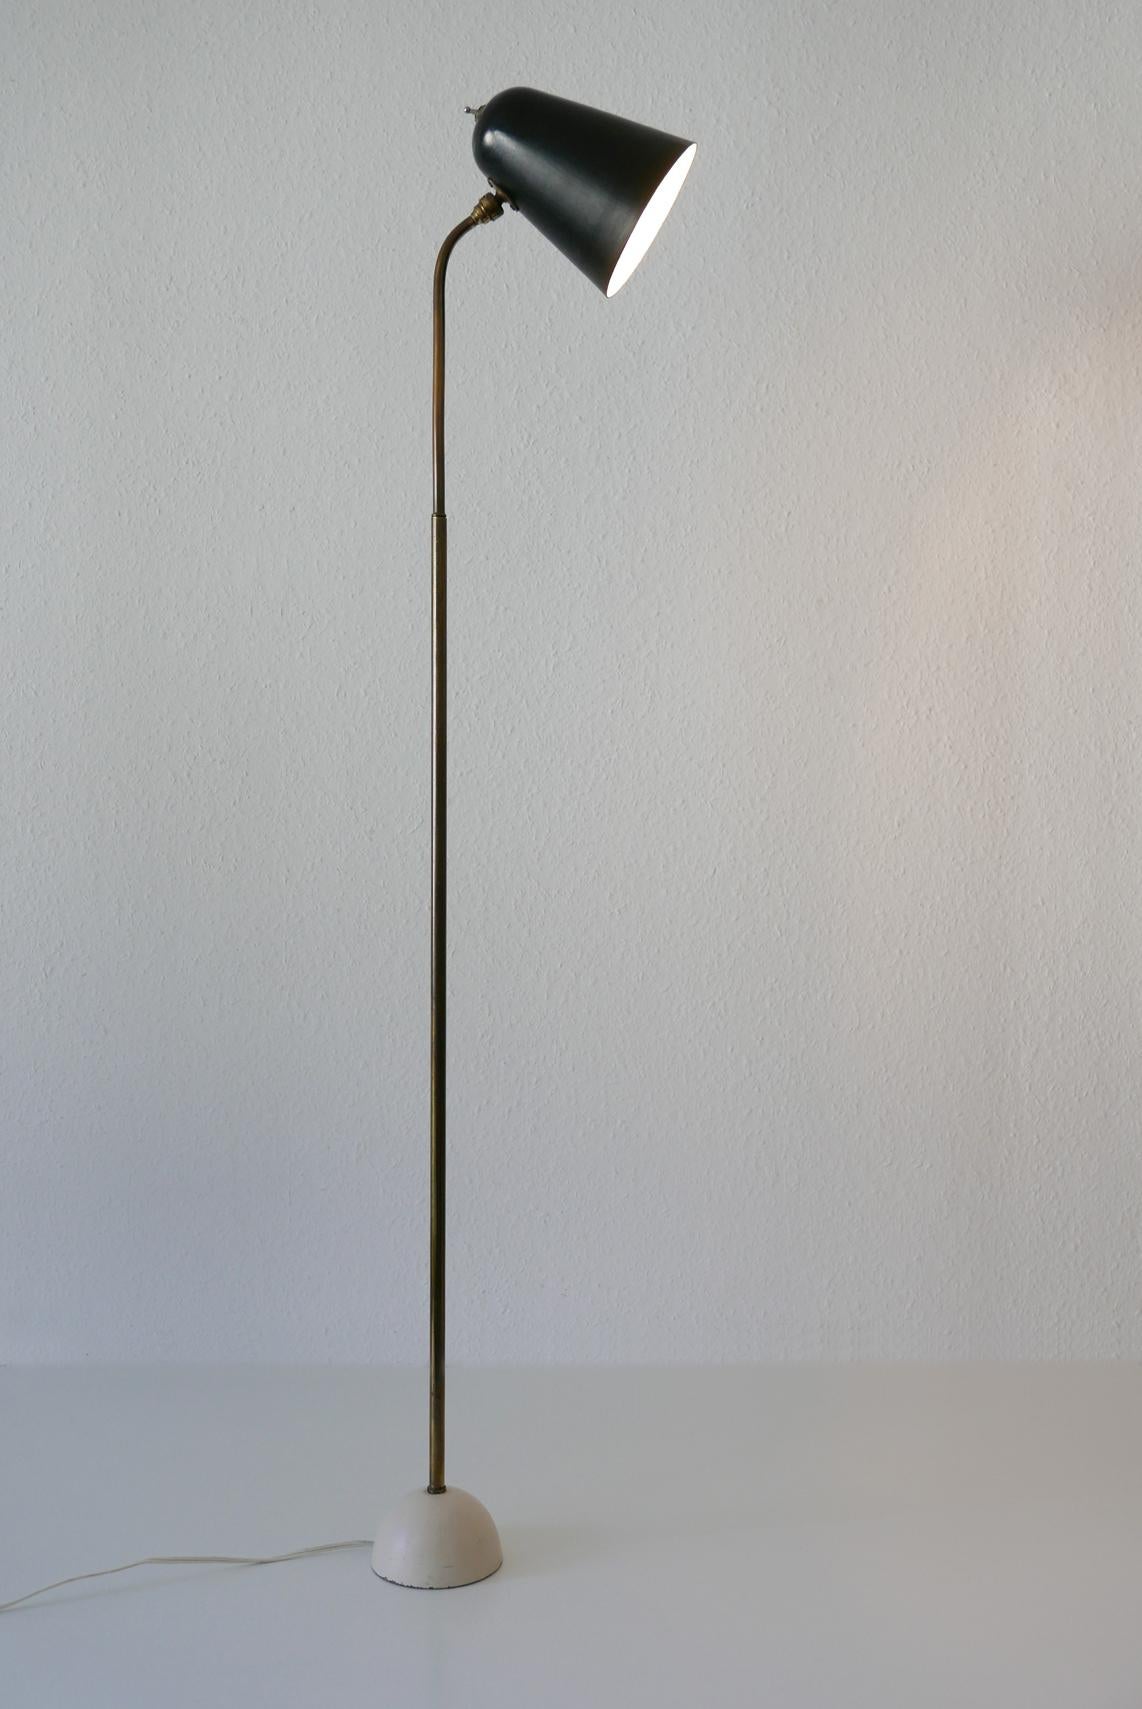 Cast Articulated Mid-Century Modern Reading Floor Lamp, 1950s, Germany